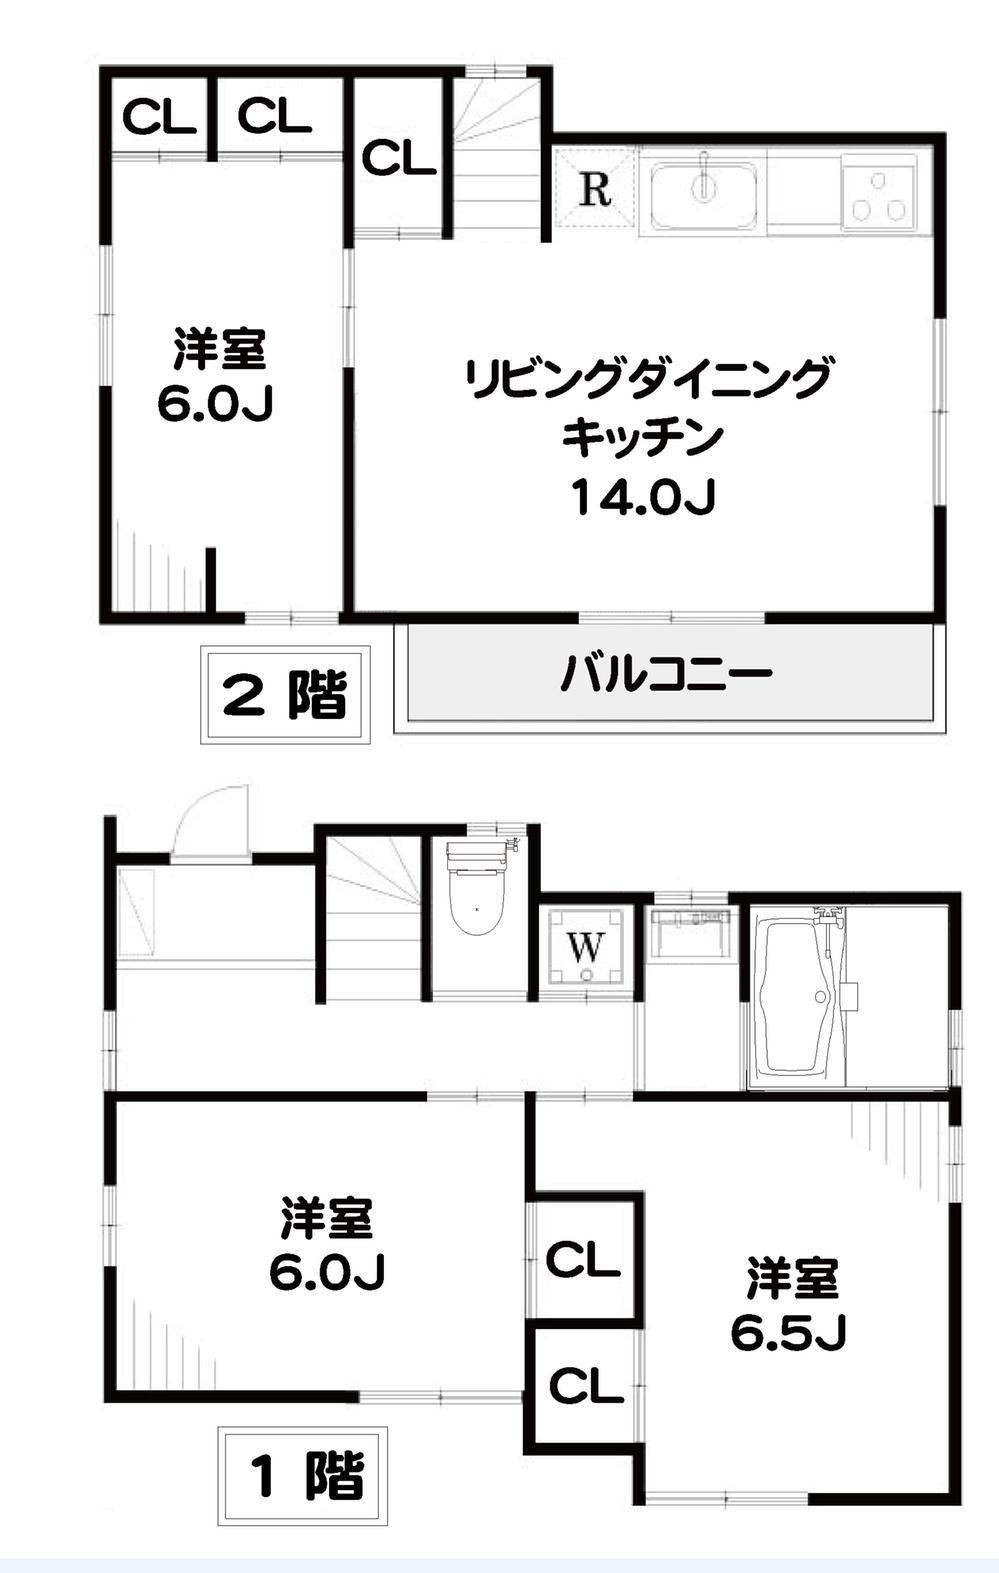 Compartment view + building plan example. Building plan example, Land price 36,800,000 yen, Land area 88.97 sq m , Building price 11 million yen, Building area 73.7 sq m reference plan